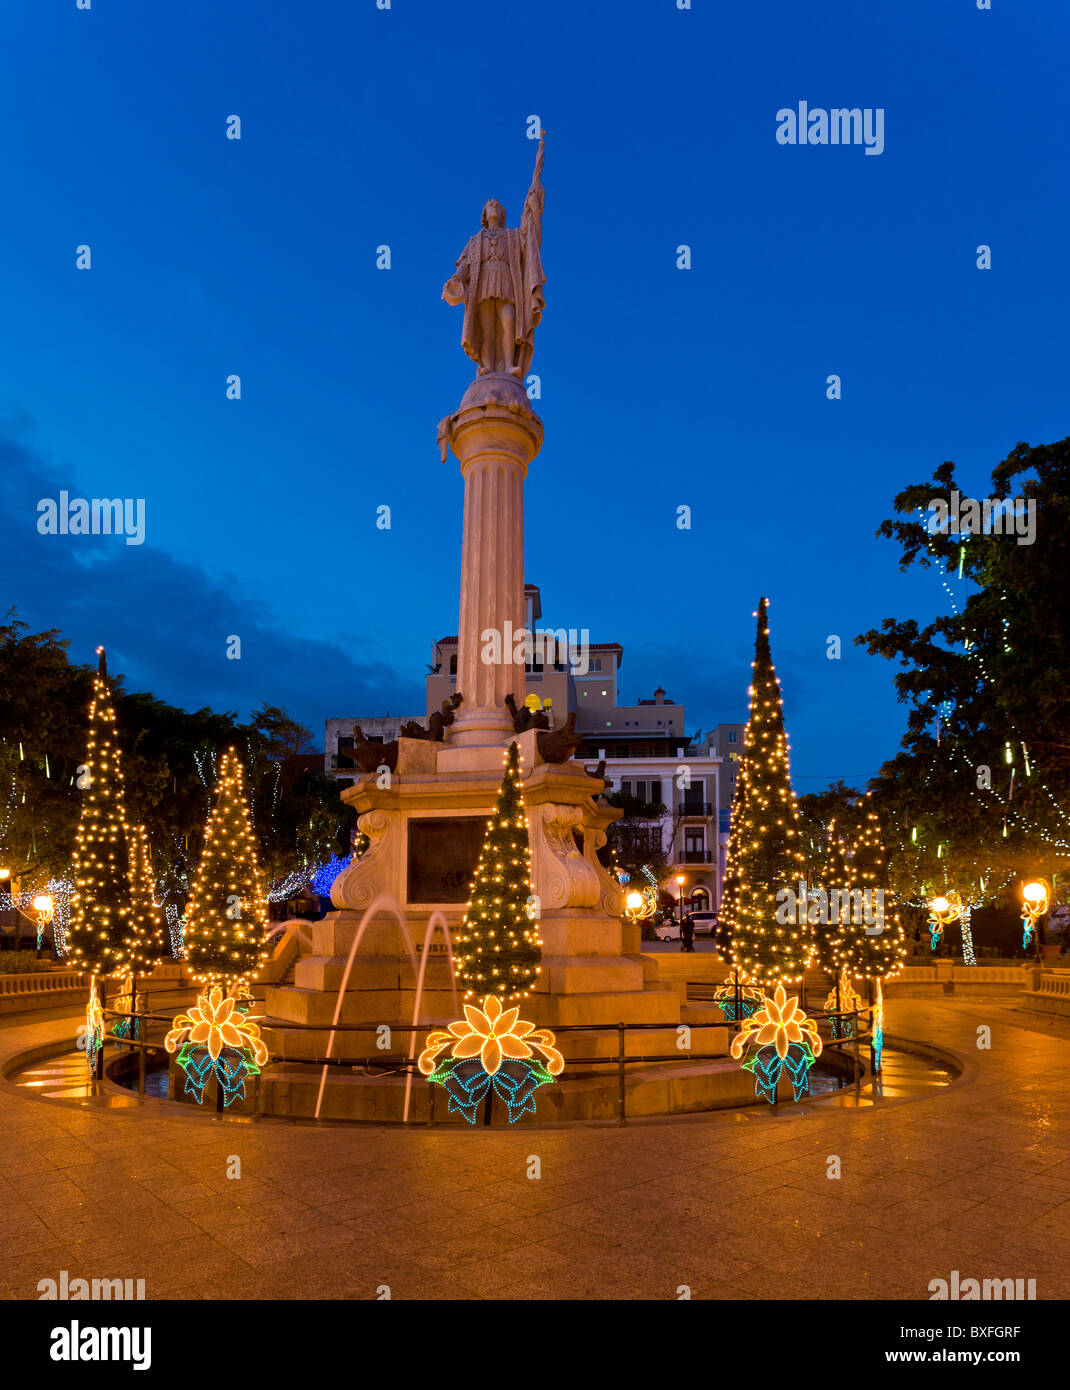 Plaza Colon in old San Juan with statue of Cristobol Colon surrounded by xmas trees and illuminations Stock Photo